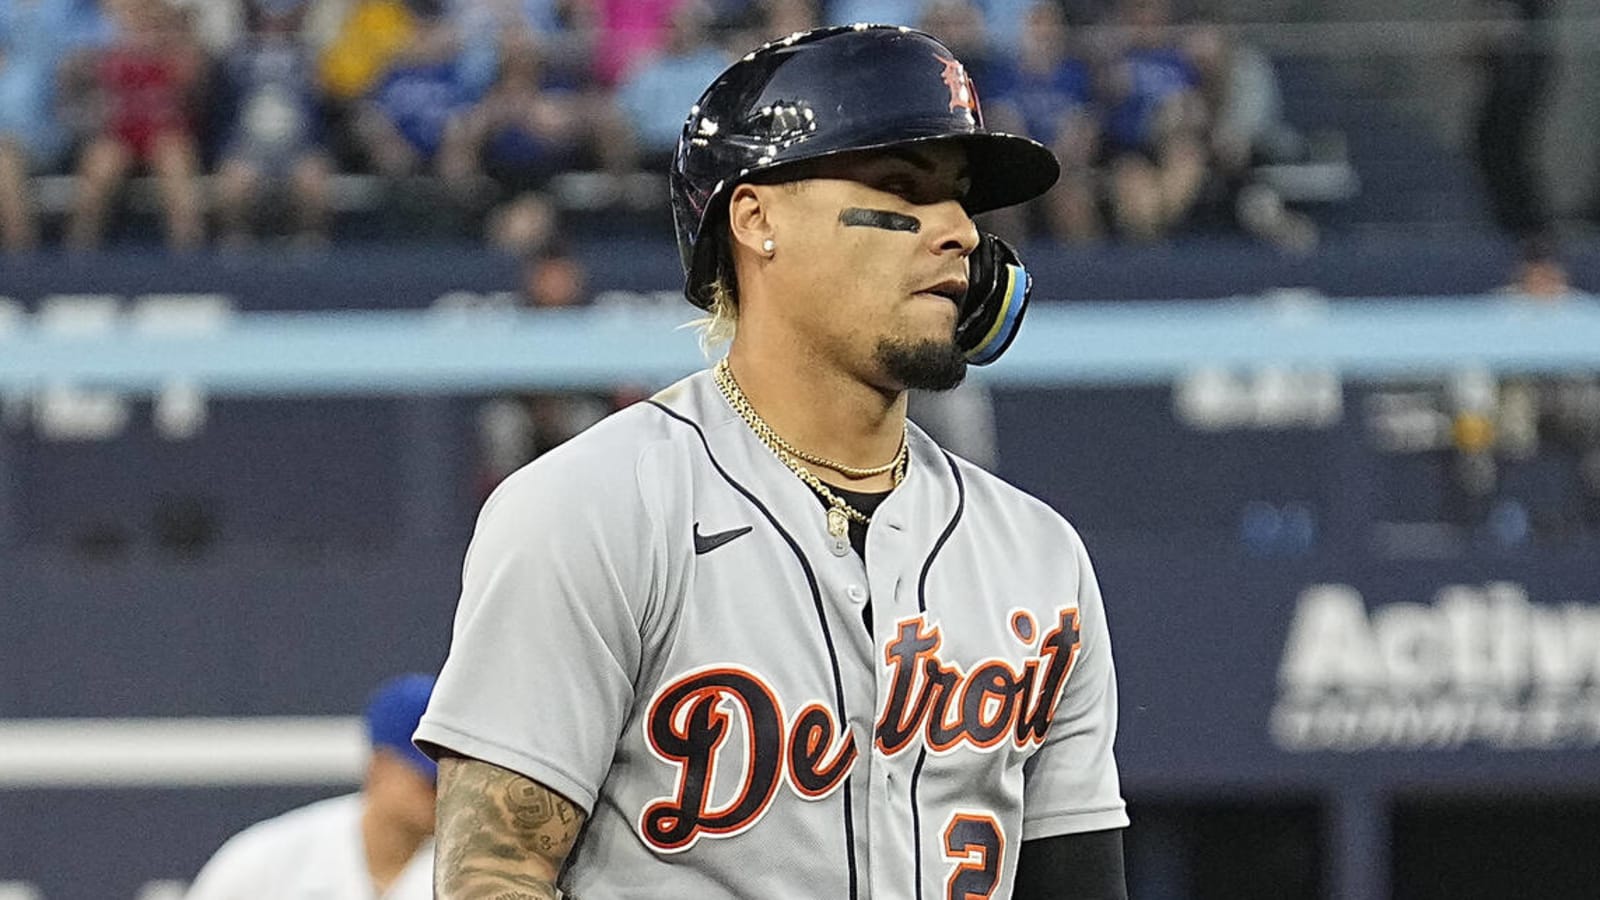 Tigers manager discusses decision to bench star